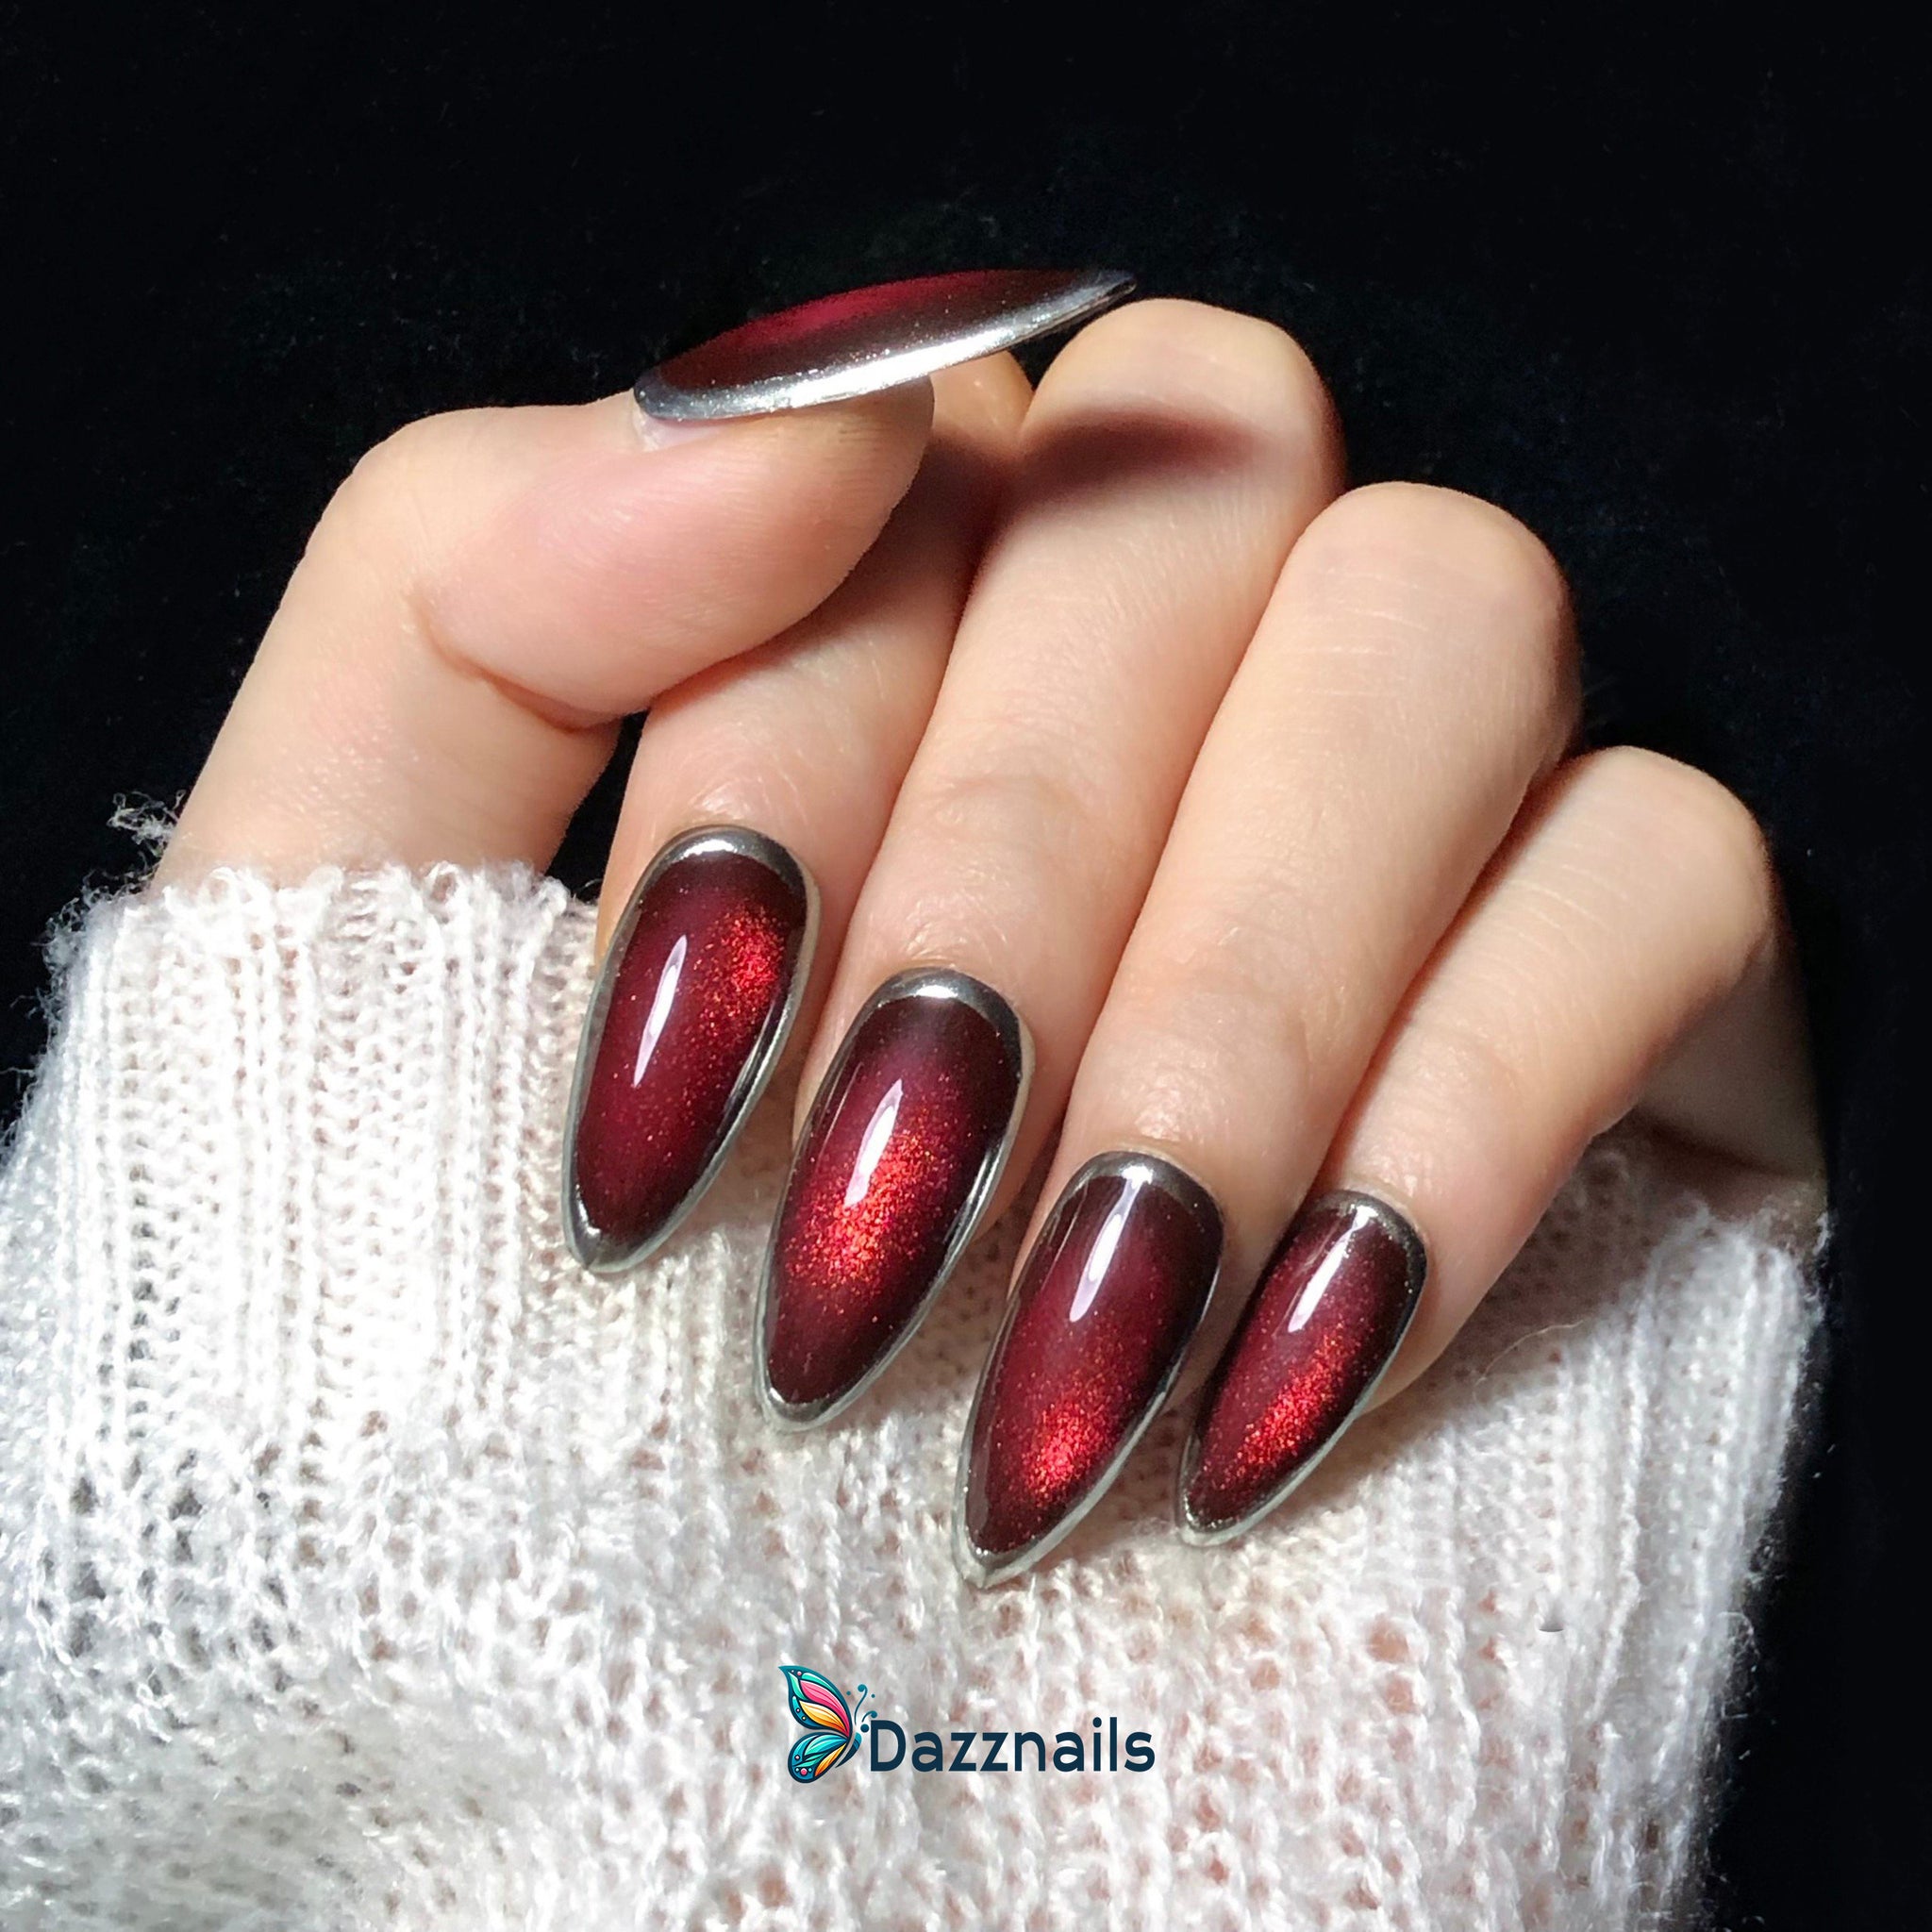 Handmade Magic Cat Eye Press on Nails - Red & Silver Aura Effect Ombre Design.